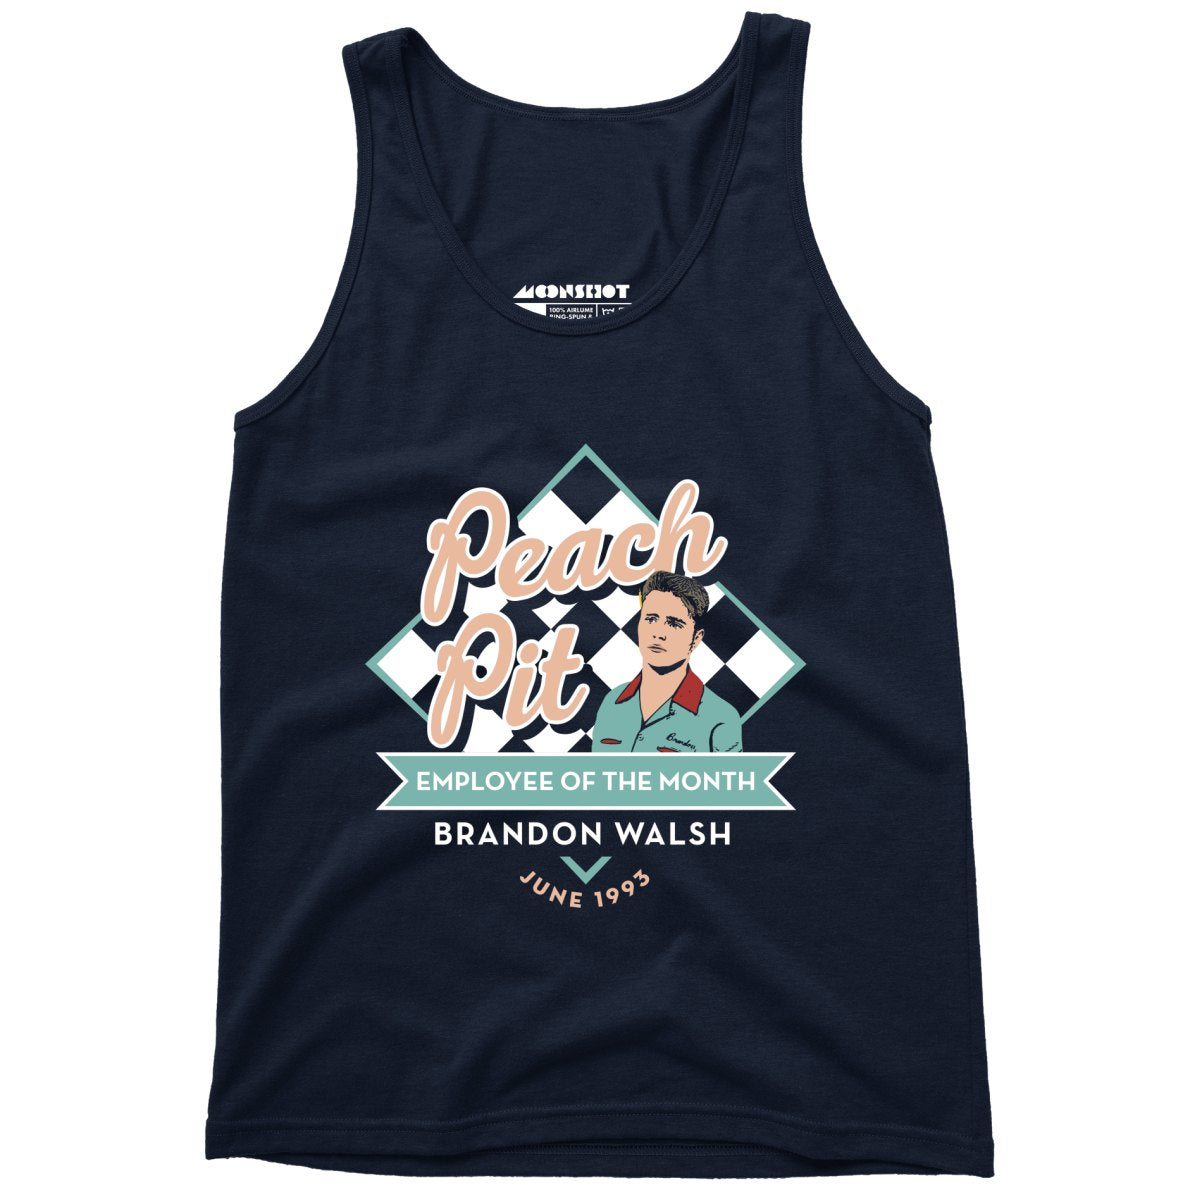 Peach Pit Employee of The Month - 90210 - Unisex Tank Top